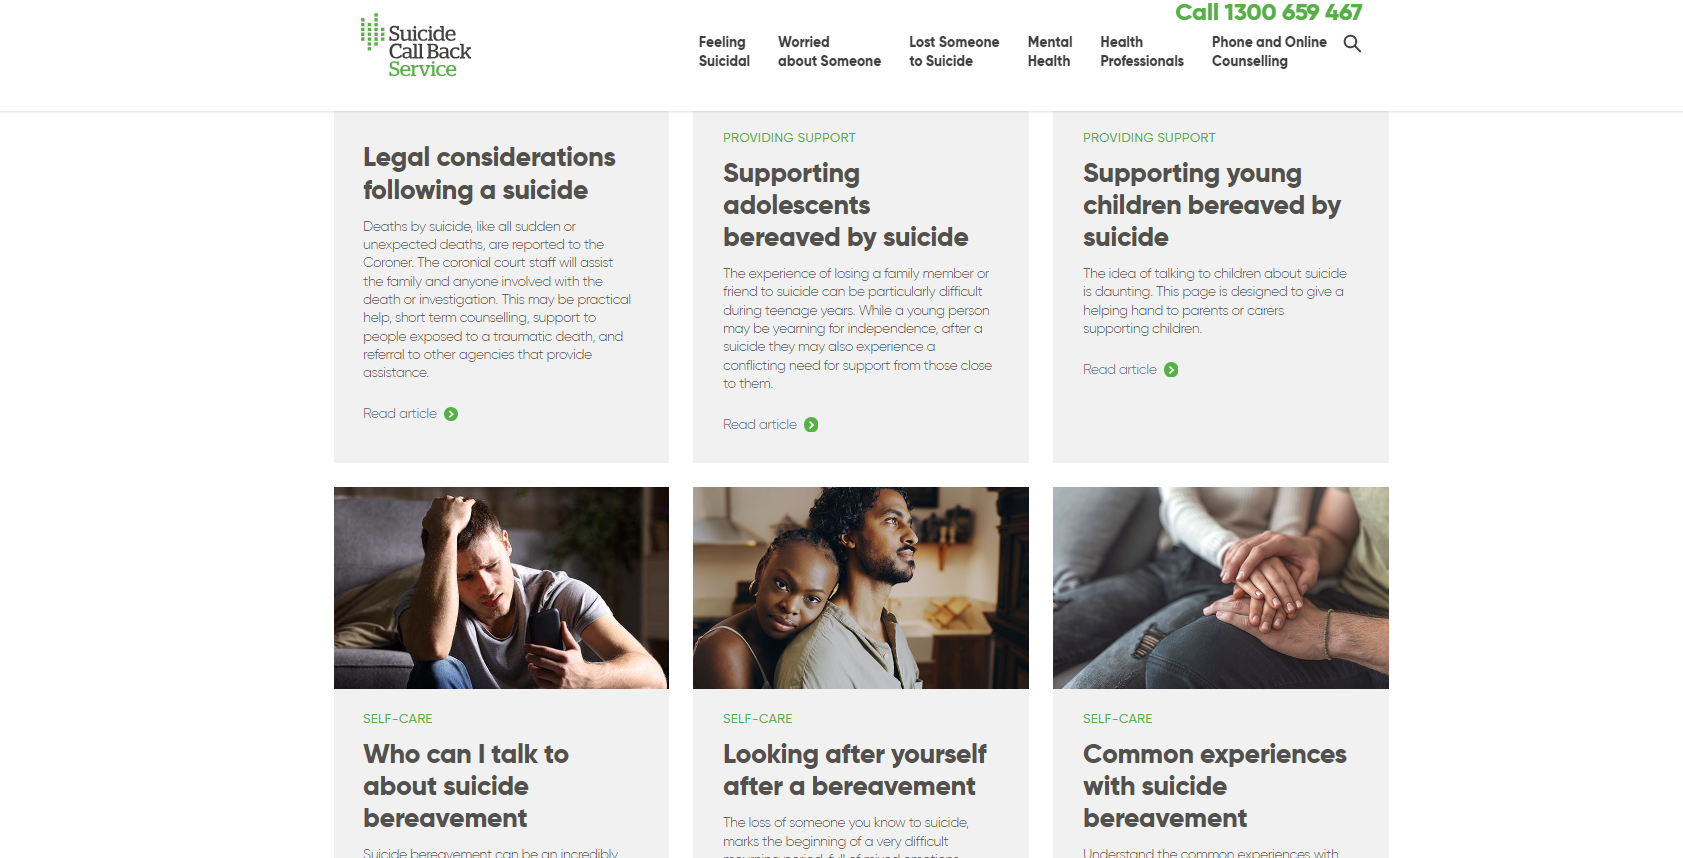 Suicide Call Back Service (Bereavement Counselling)